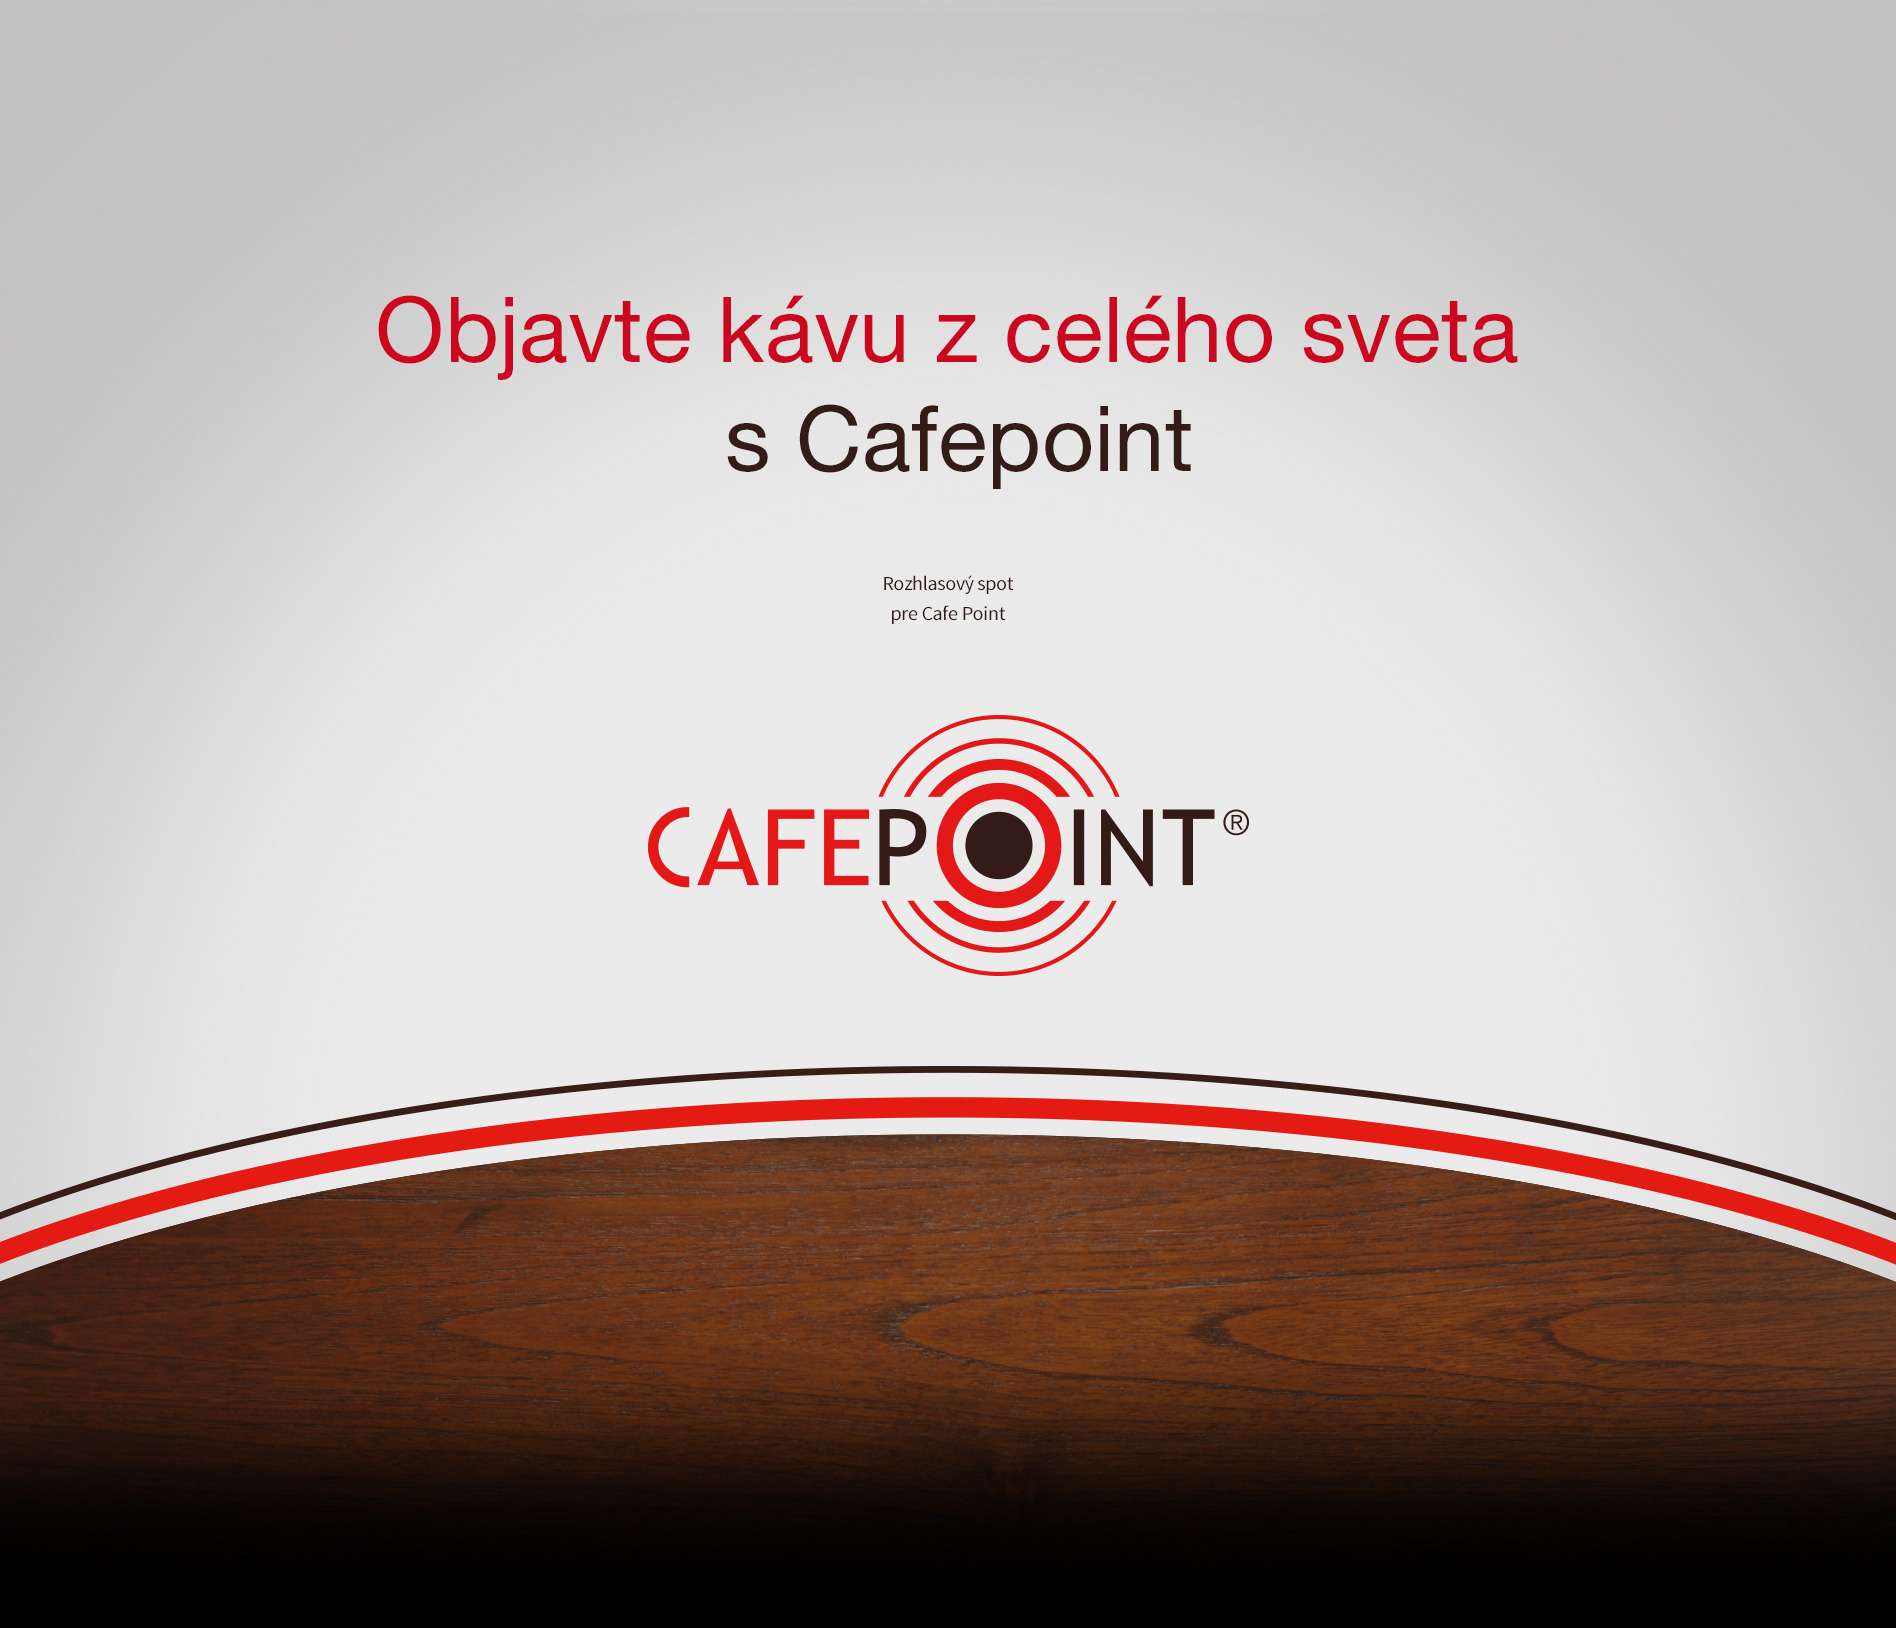 CAFE POINT